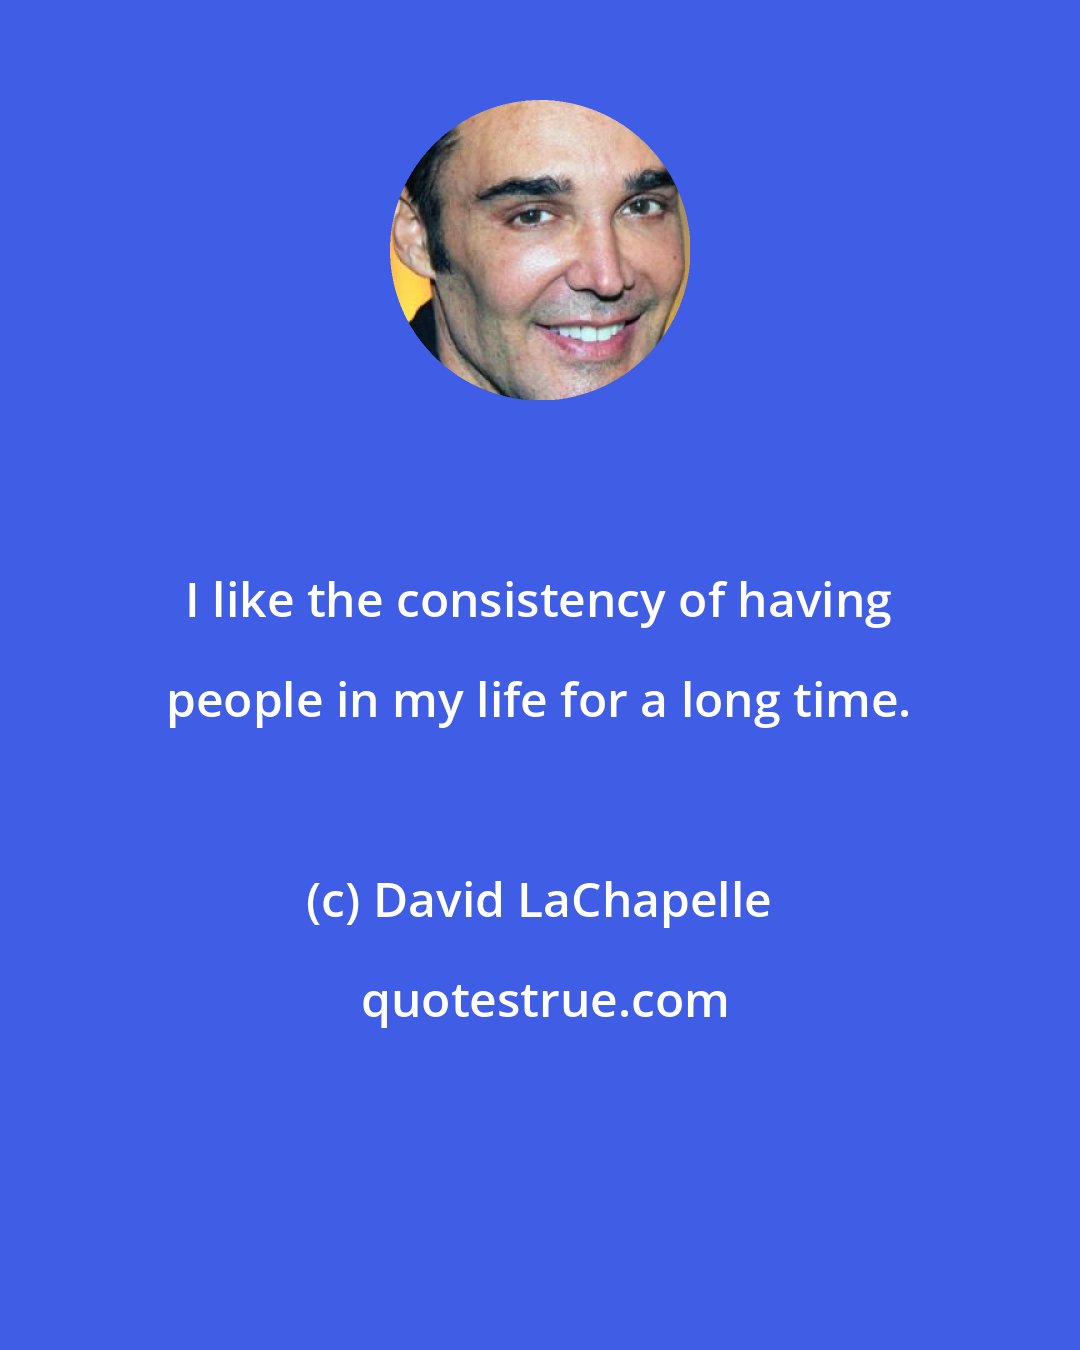 David LaChapelle: I like the consistency of having people in my life for a long time.